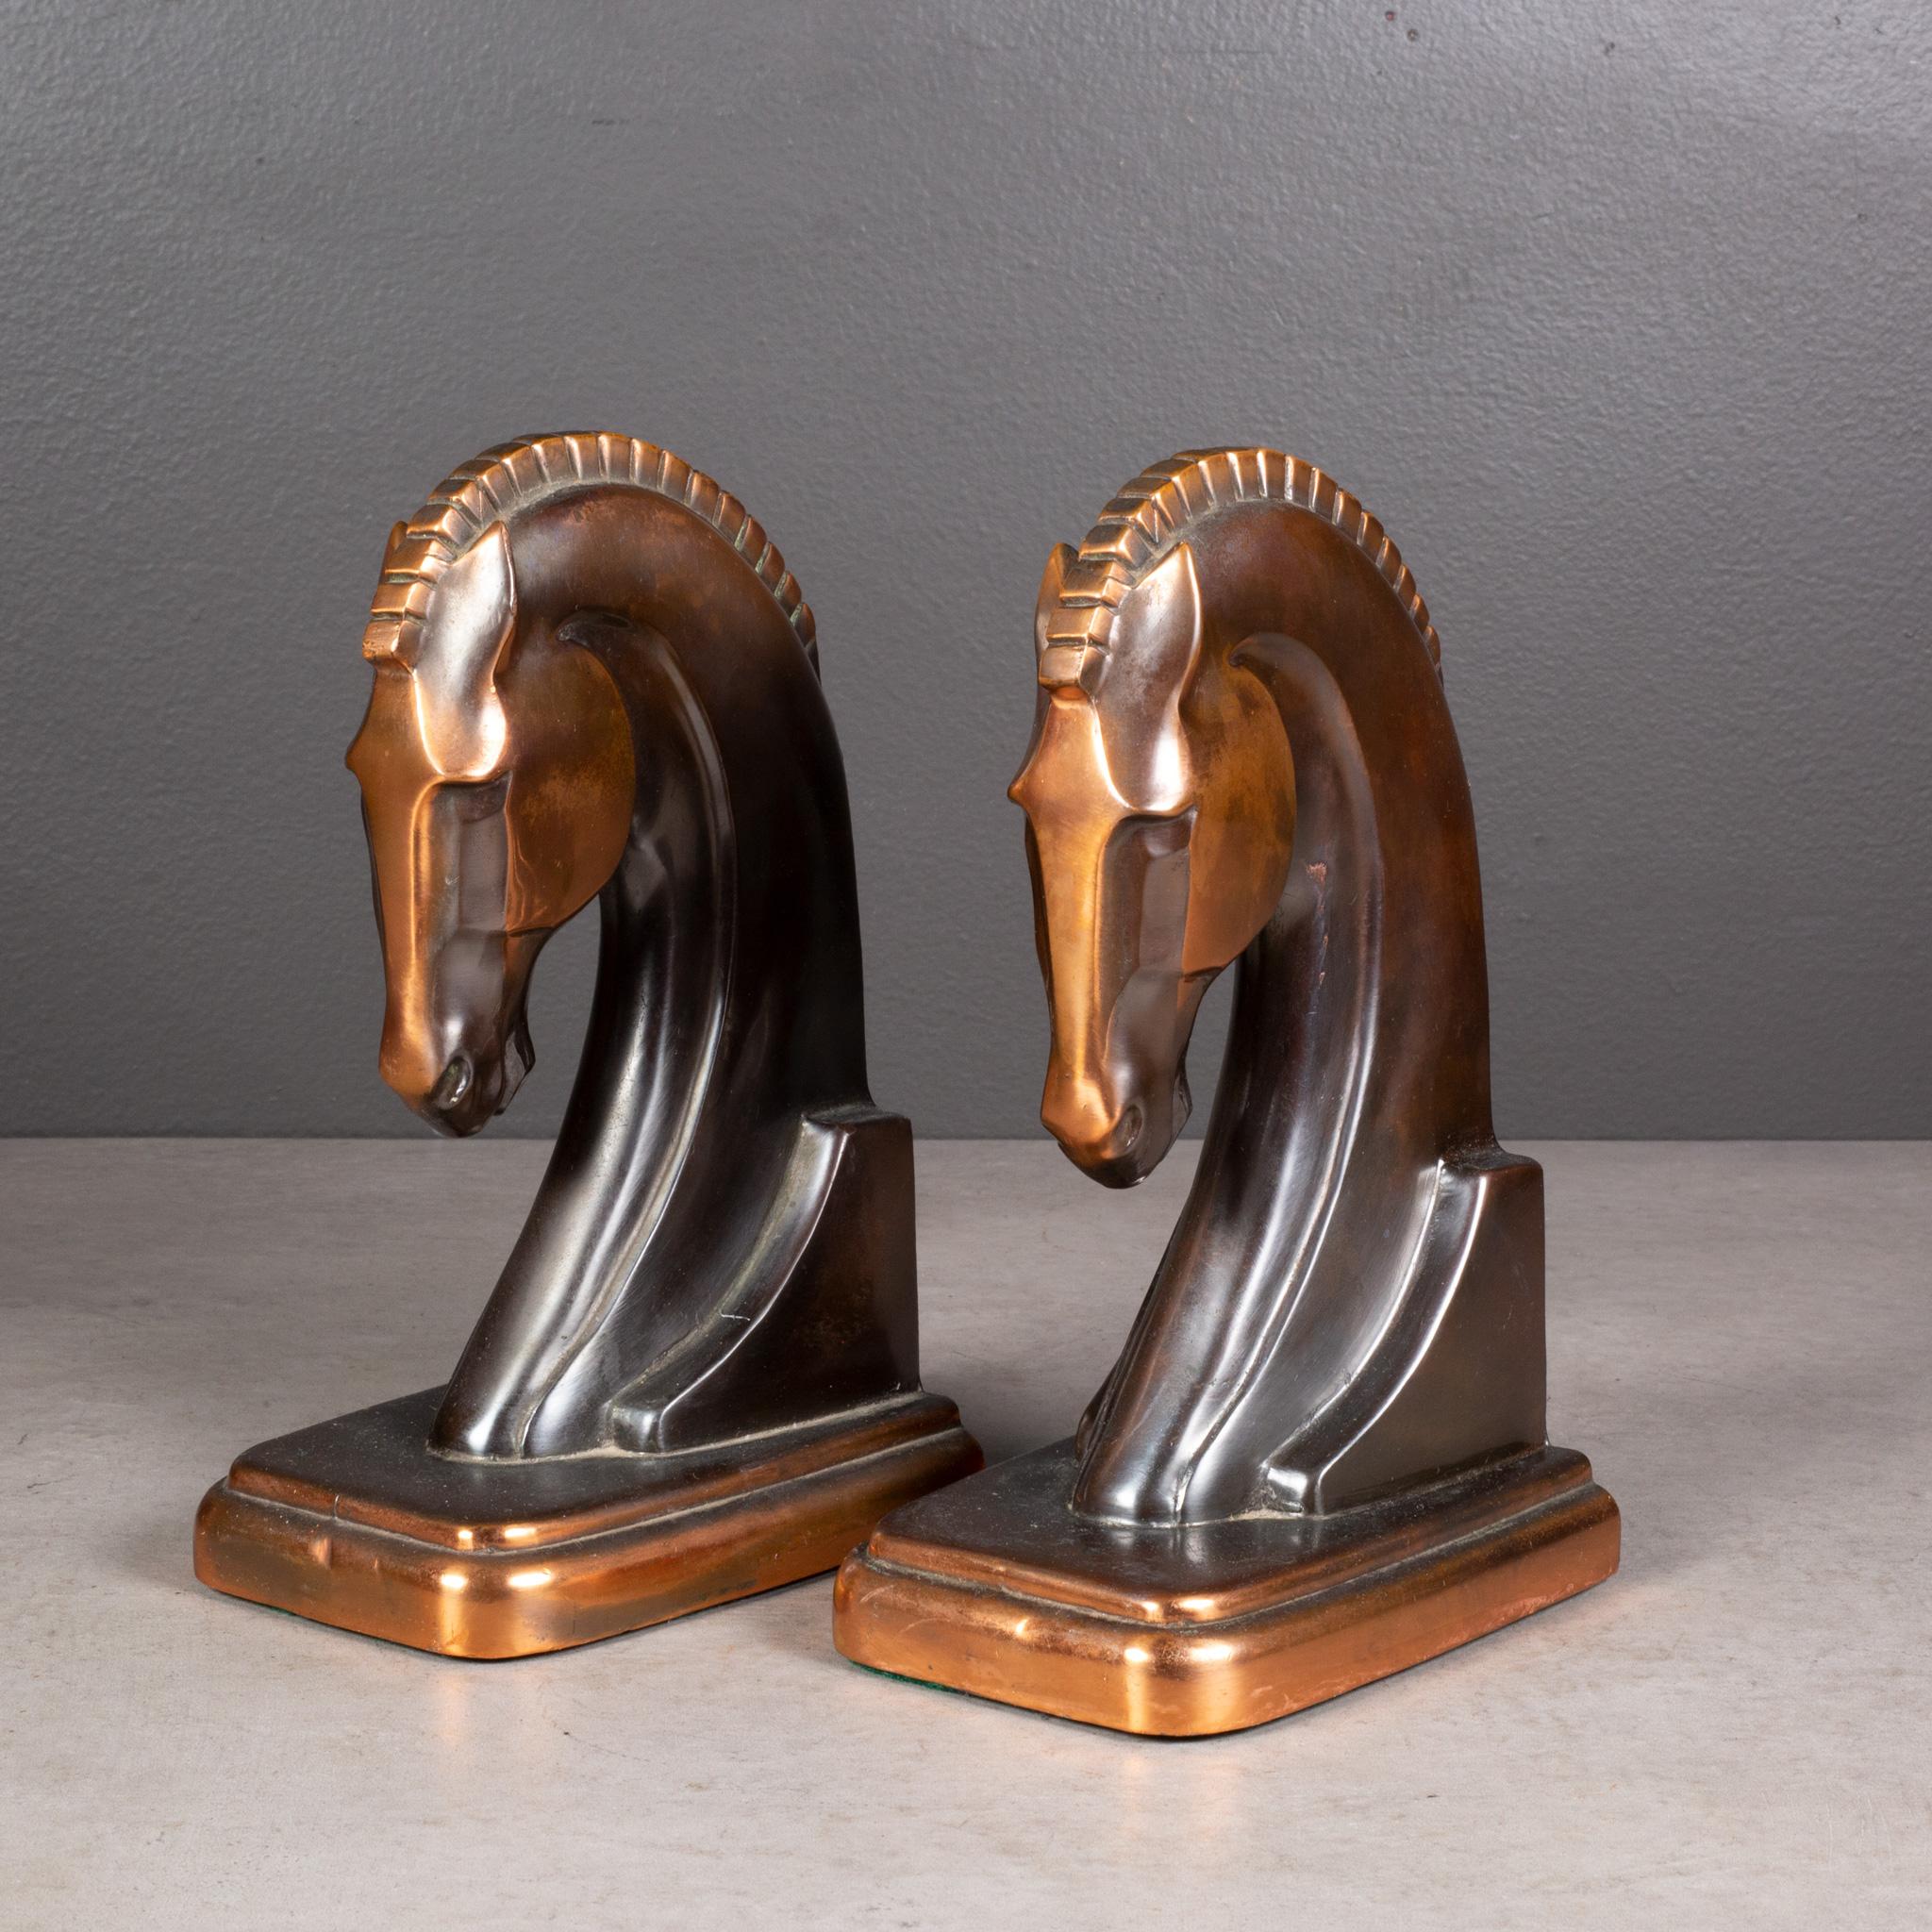 ABOUT

A pair of Art Deco metal Trojan horse bookends manufactured by Dodge Trophy Inc. Both pieces have retained their original bronze and copper finish and are in good condition with appropriate patina for their age. Substantial in weight.

   